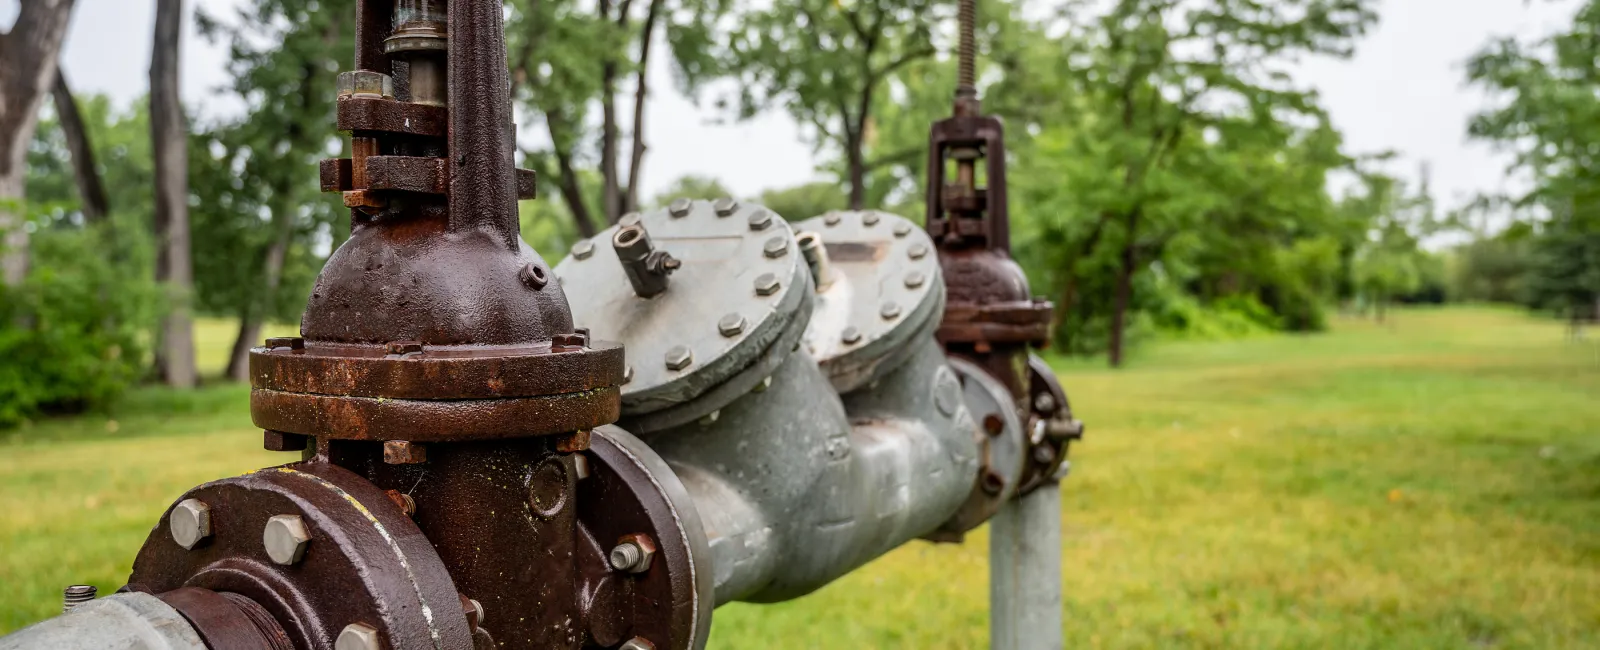 Understanding Backflow Prevention and the Importance of Backflow Testing